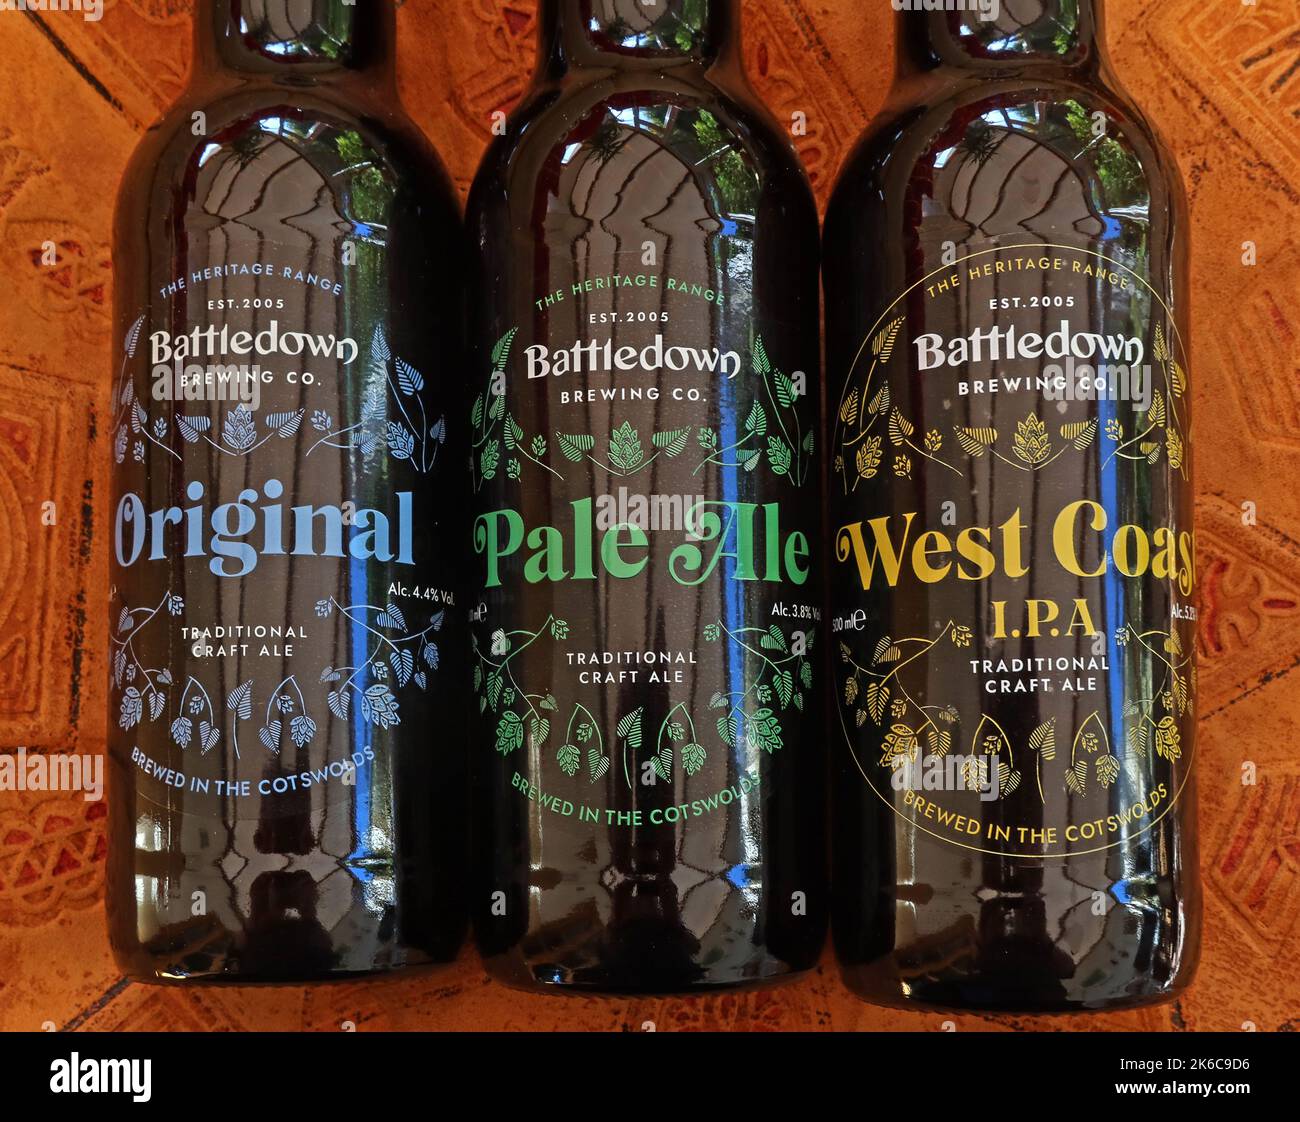 Battledown Brewing Co, Quality craft bottled ,beers from Gloucestershire, South West England, UK, Original, Pale Ale, West Coast IPA Stock Photo